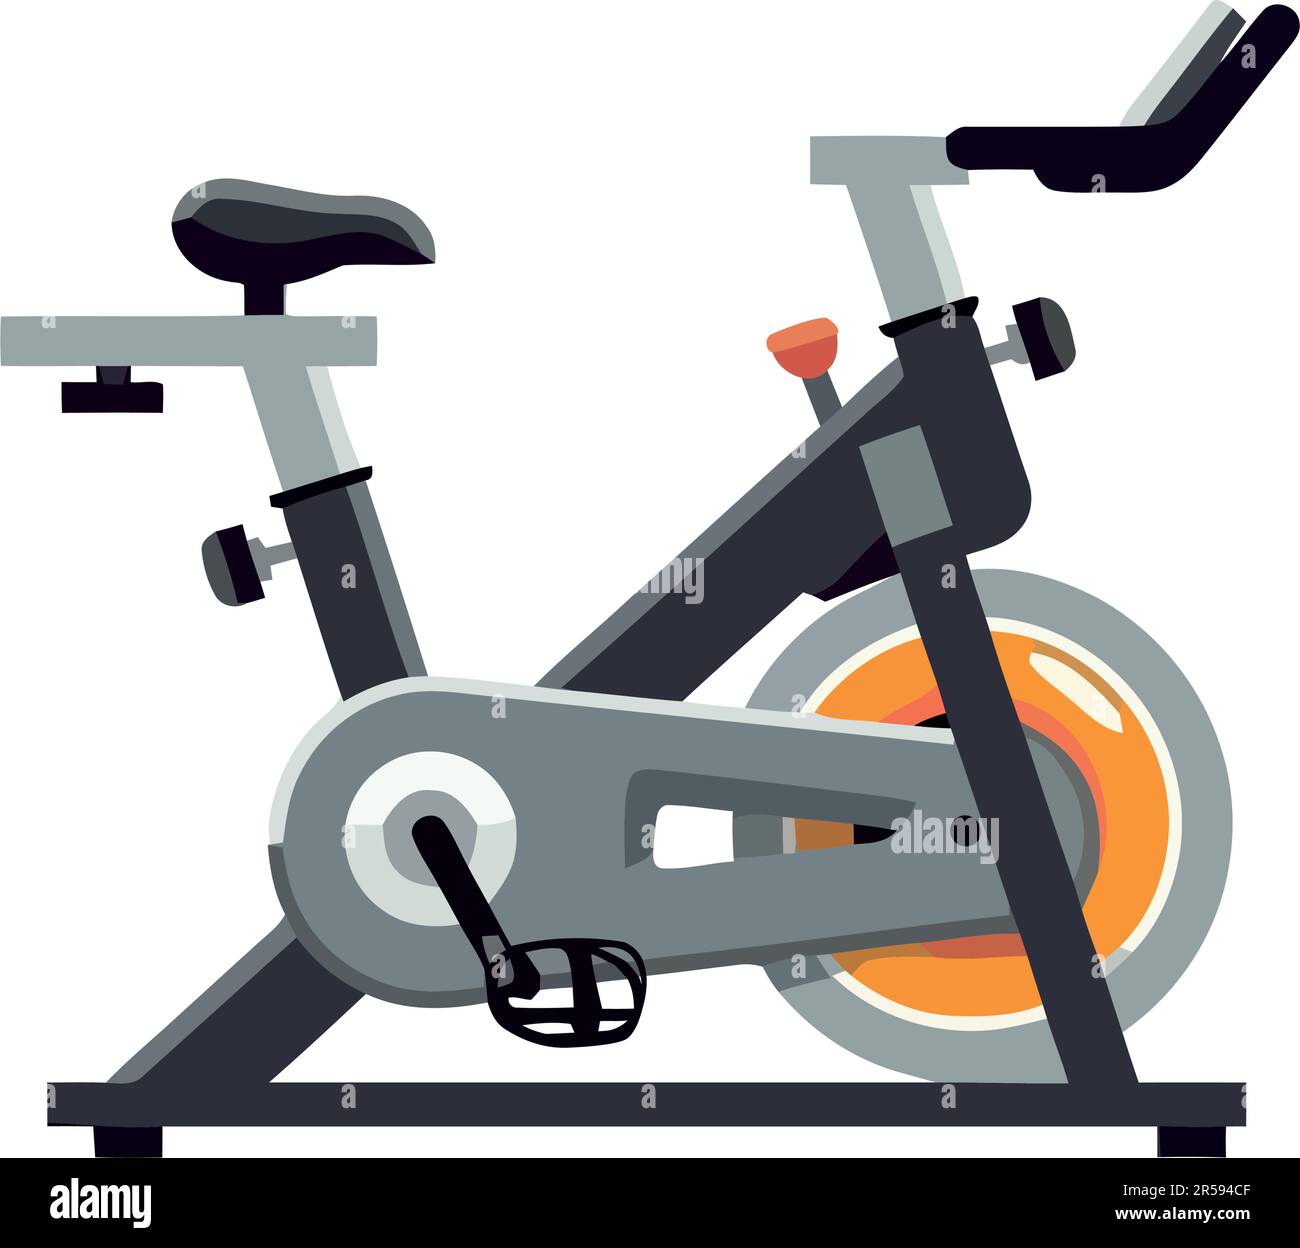 Healthy lifestyle symbolized by spinning bike Stock Vector